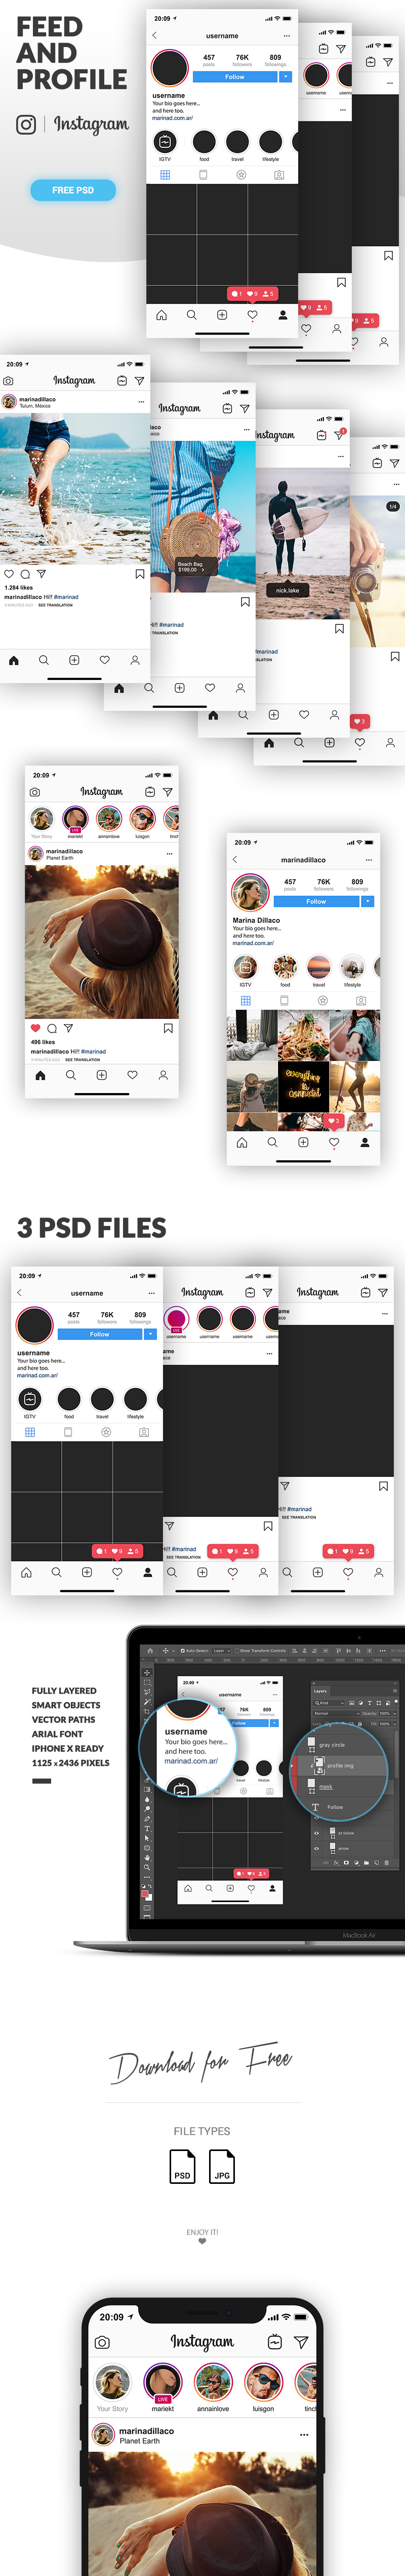 FREE Instagram Feed and Profile PSD UI – 2019 | MarinaD